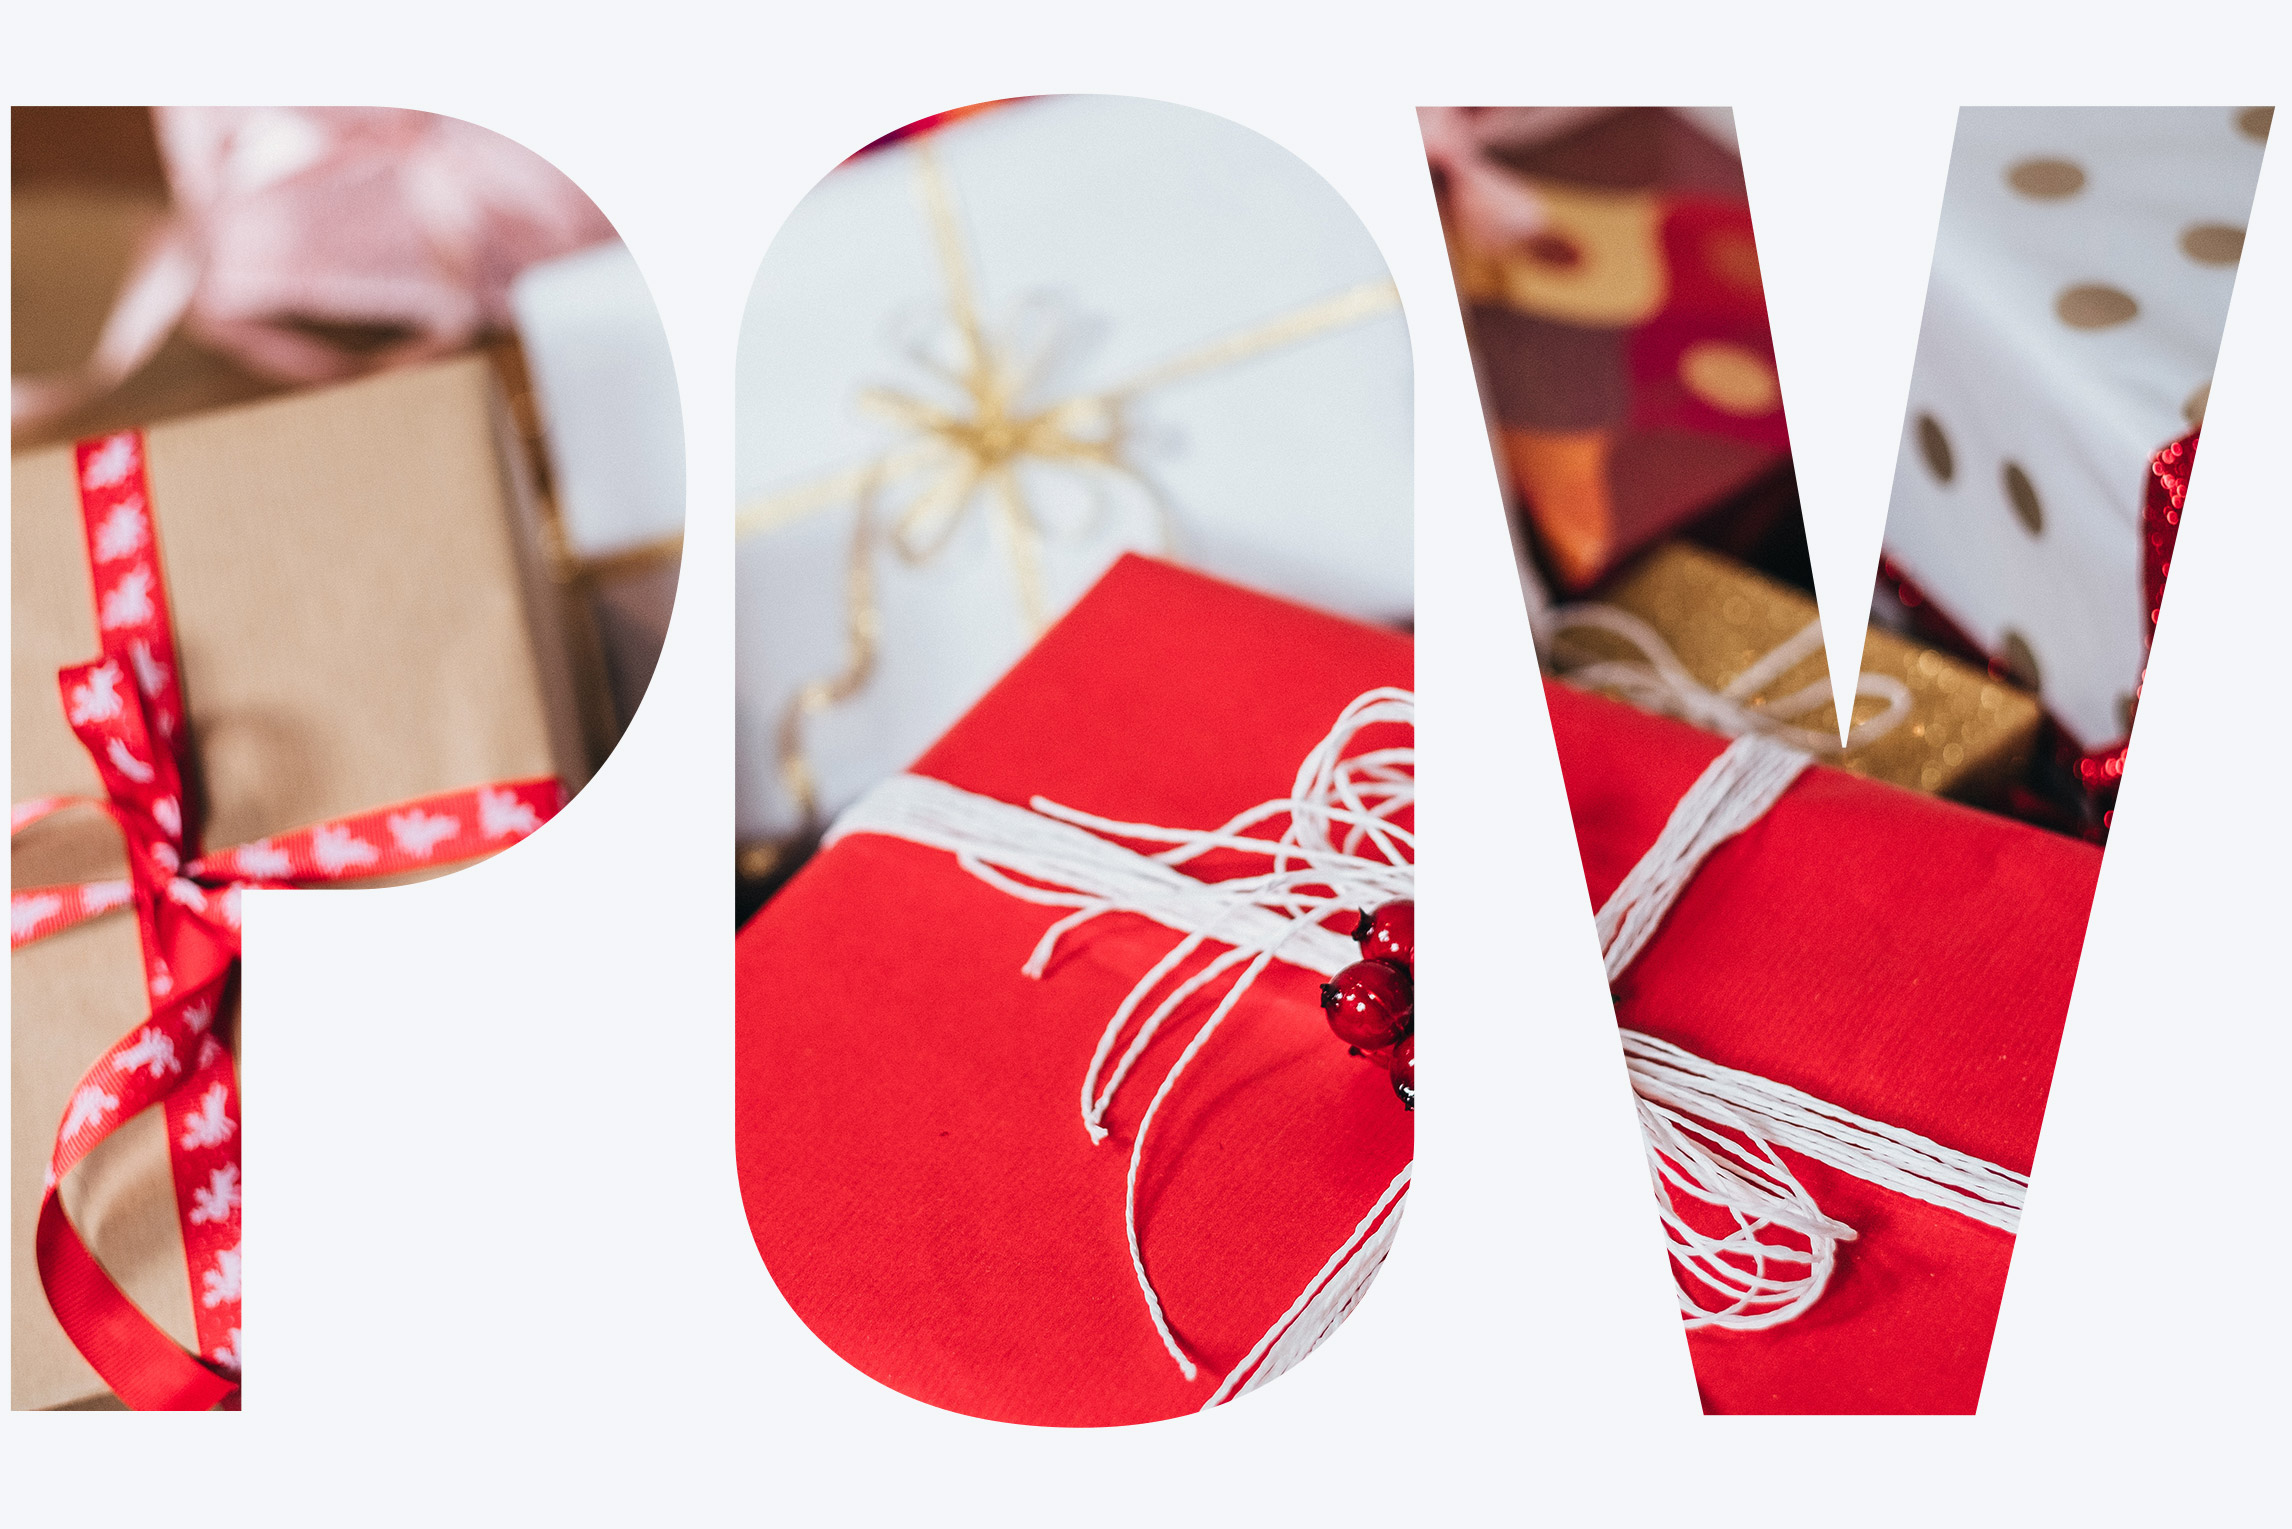 wrapped holiday presents in red, gold, and white with a white overlay spelling out "POV"